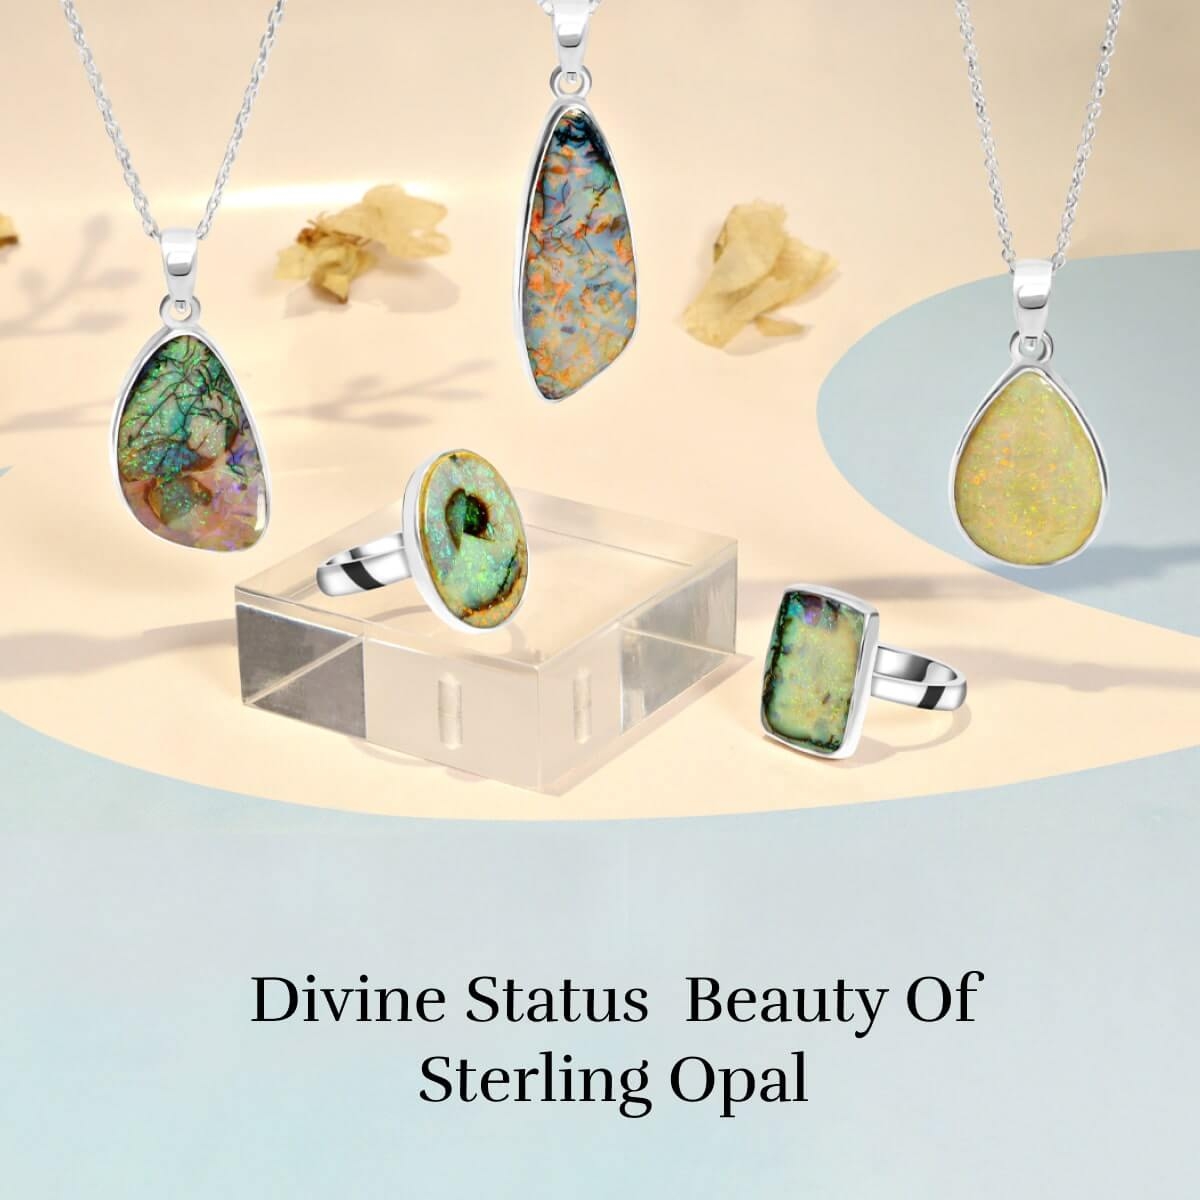 Physical Properties of Sterling Opal